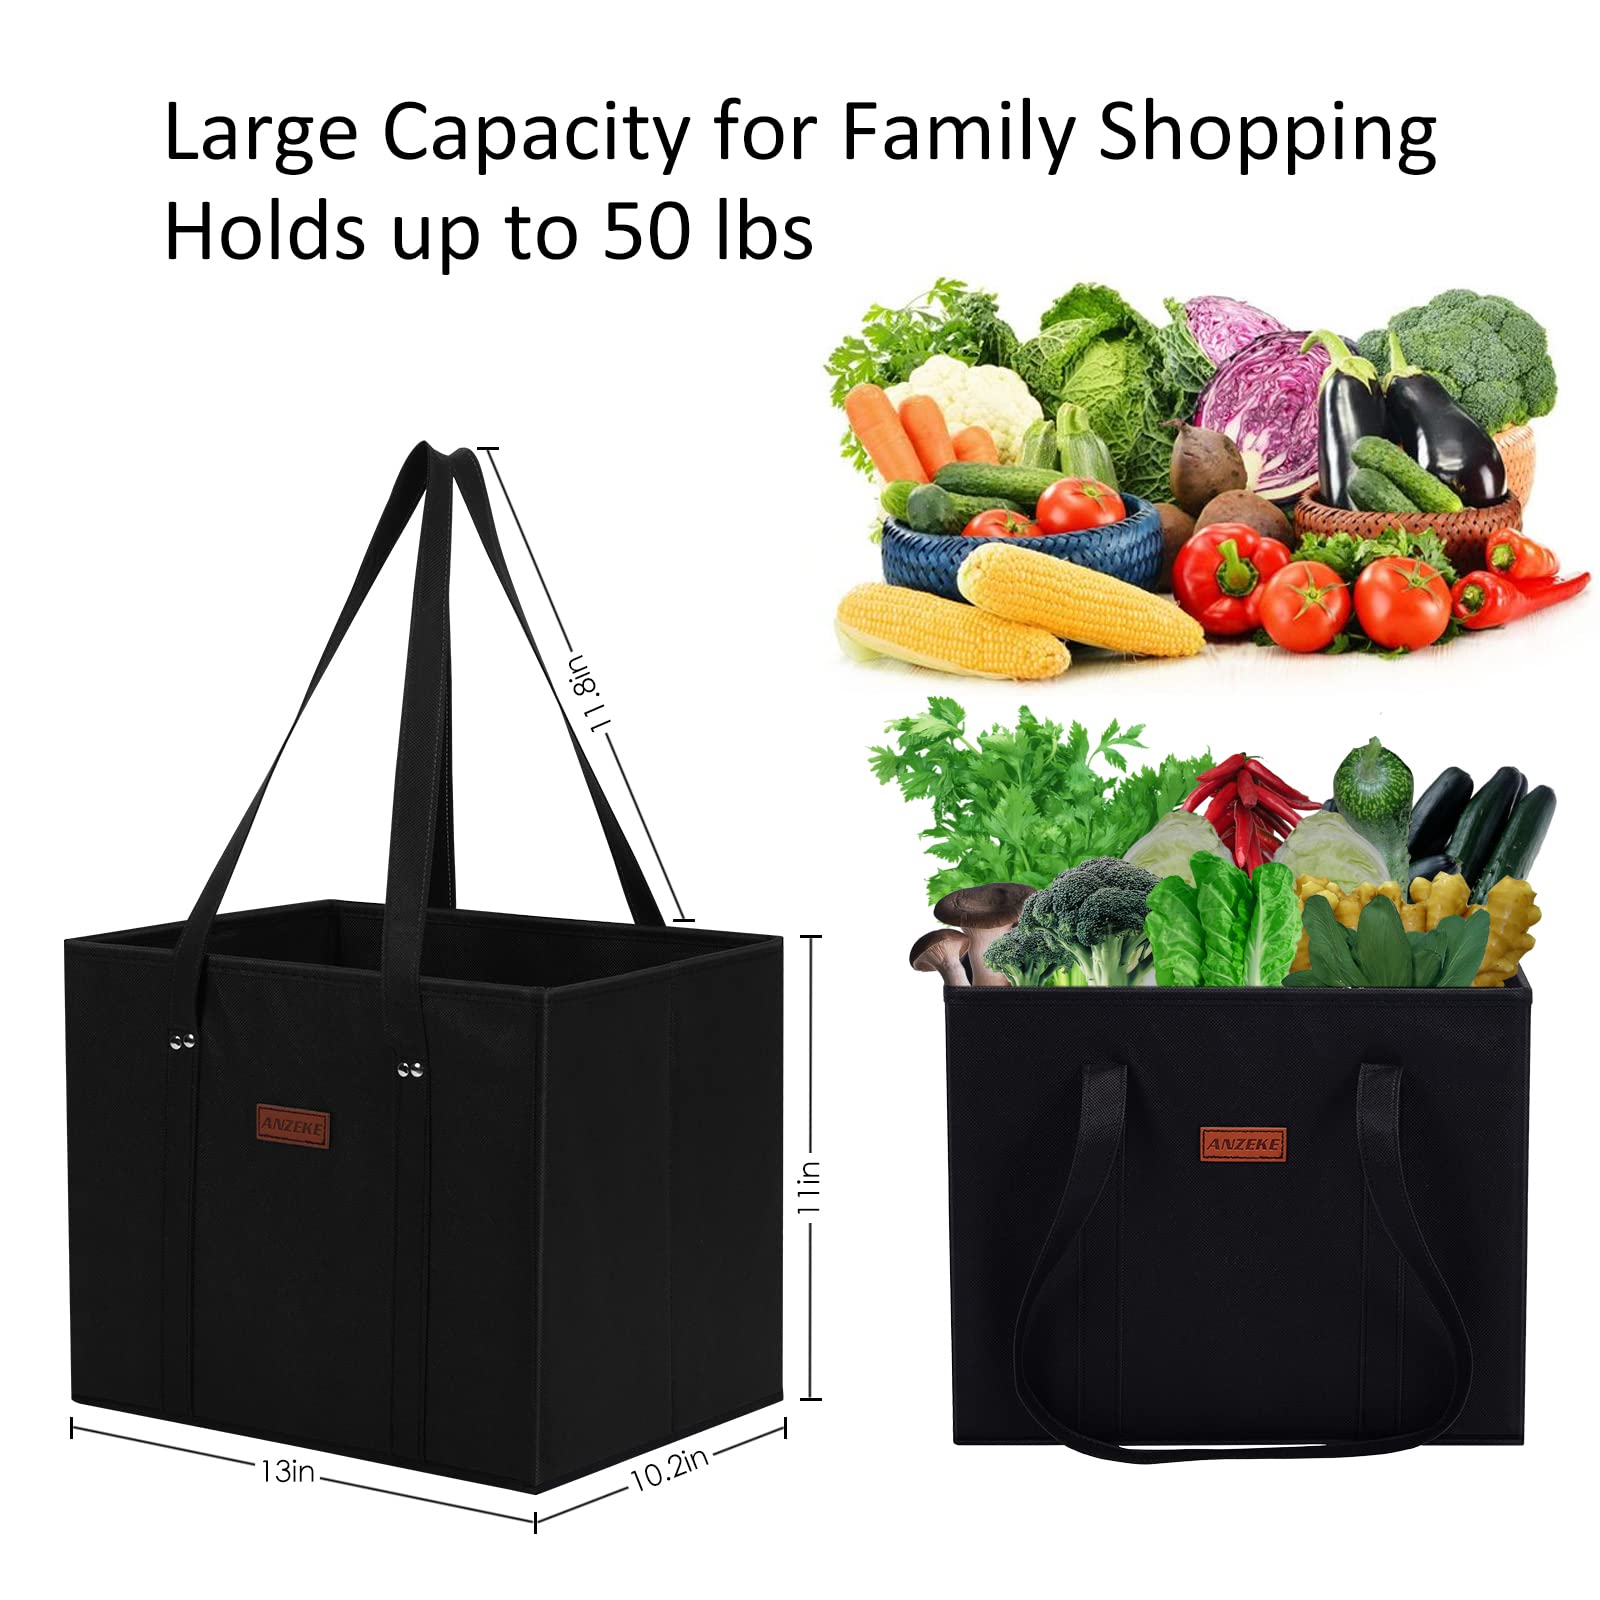 ANZEKE 4 Pack Reusable Grocery Bags Shopping Bag with Reinforced Bottom and Handles,Collapsible, Durable and Eco Friendly for Shopping,Groceries, Storage, Picnic, Beach, Pool, Laundry (Black)